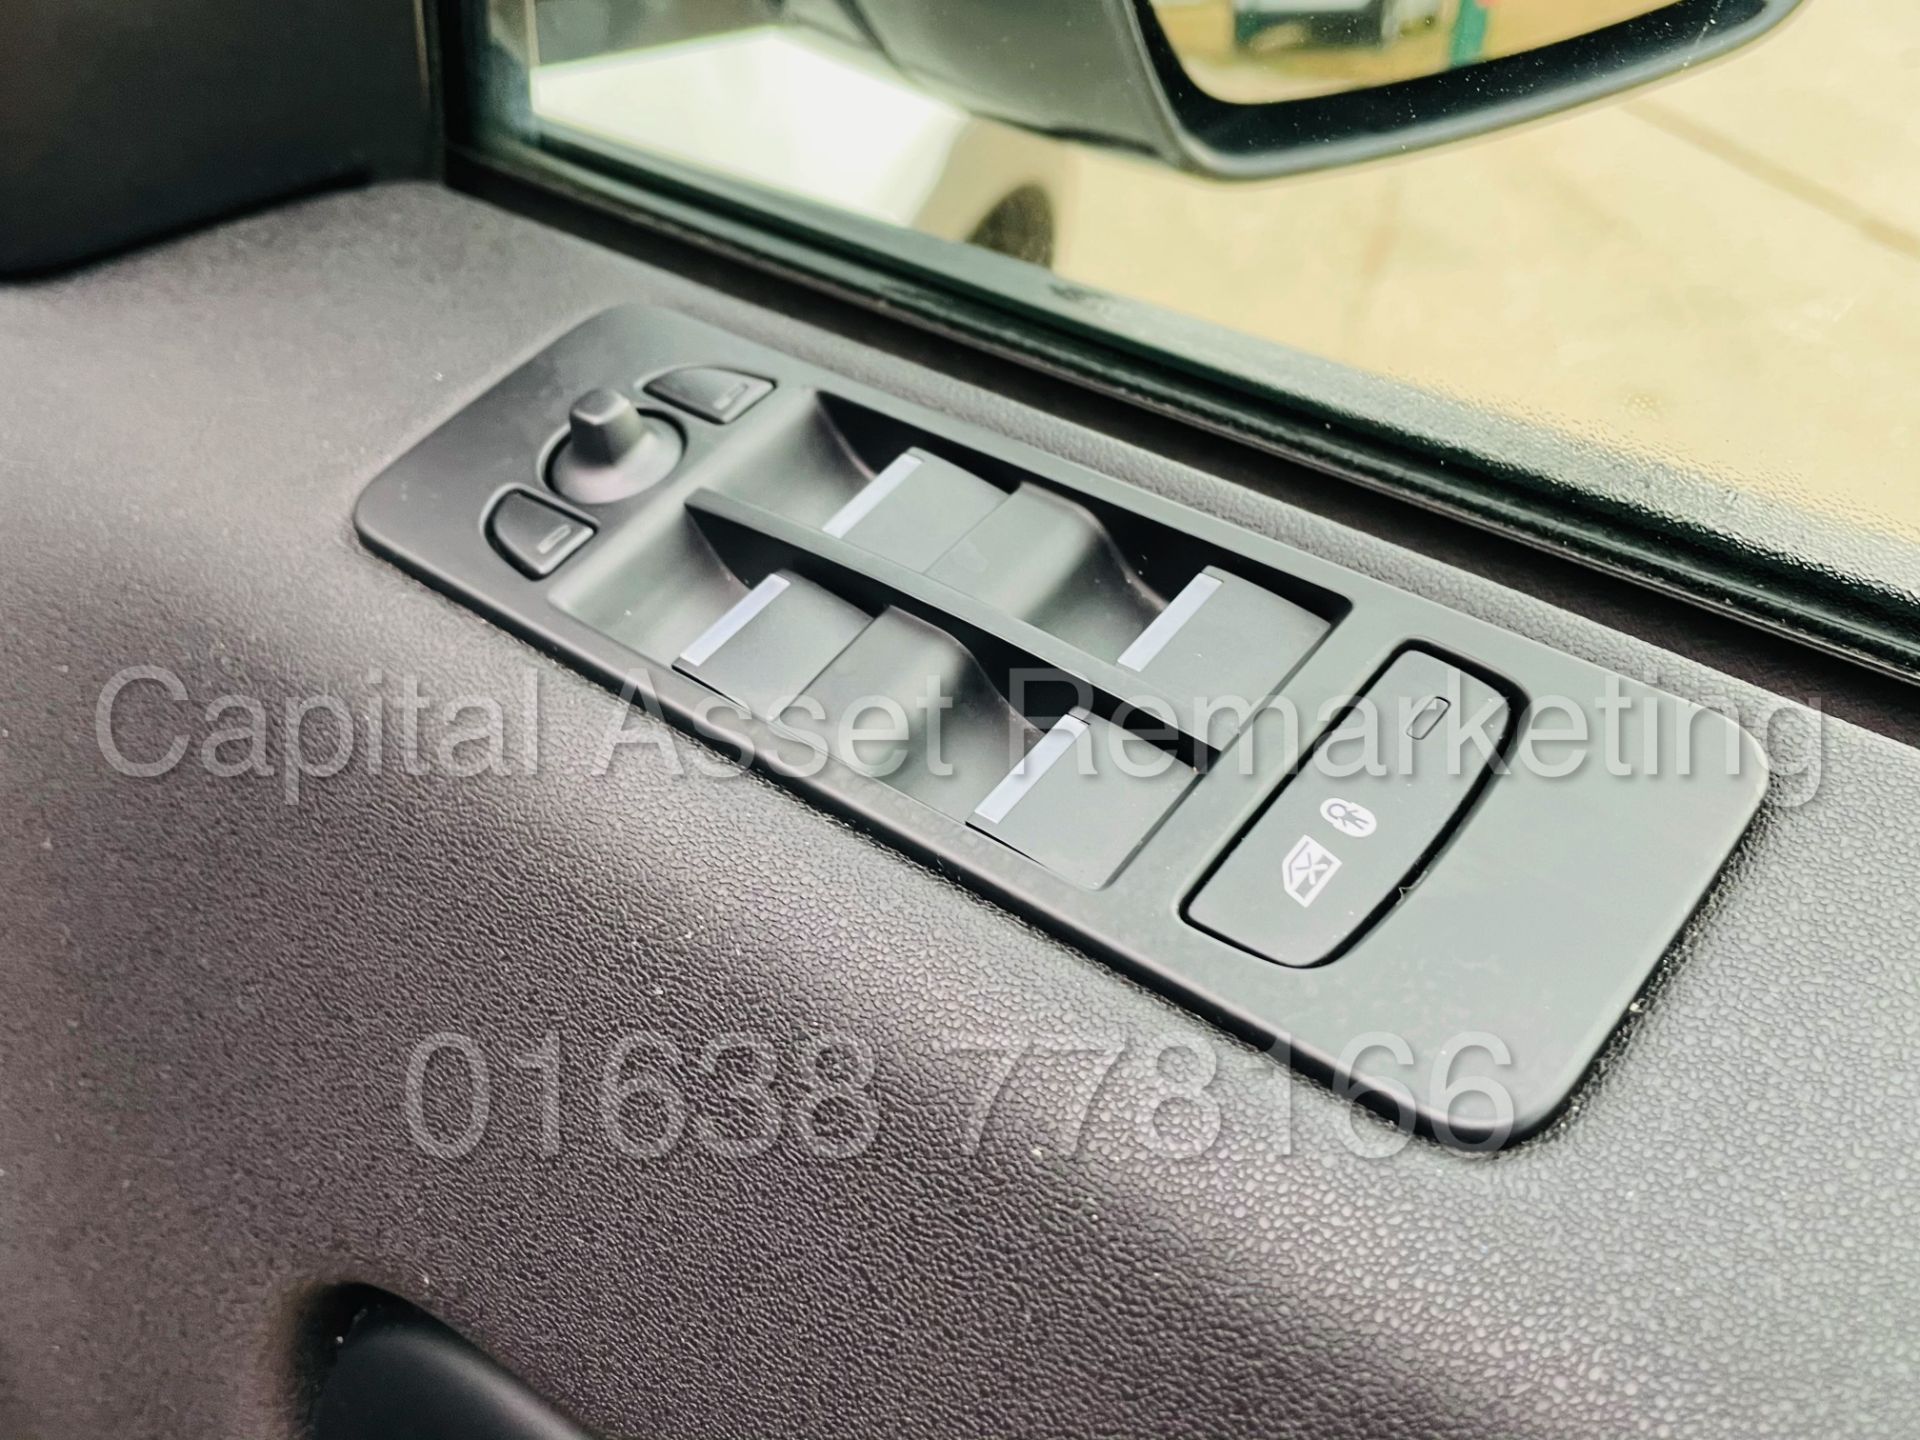 LAND ROVER DISCOVERY SPORT *SPECIAL EDITION* SUV (2018) '2.0 TD4 - STOP/START' (1 OWNER FROM NEW) - Image 34 of 48